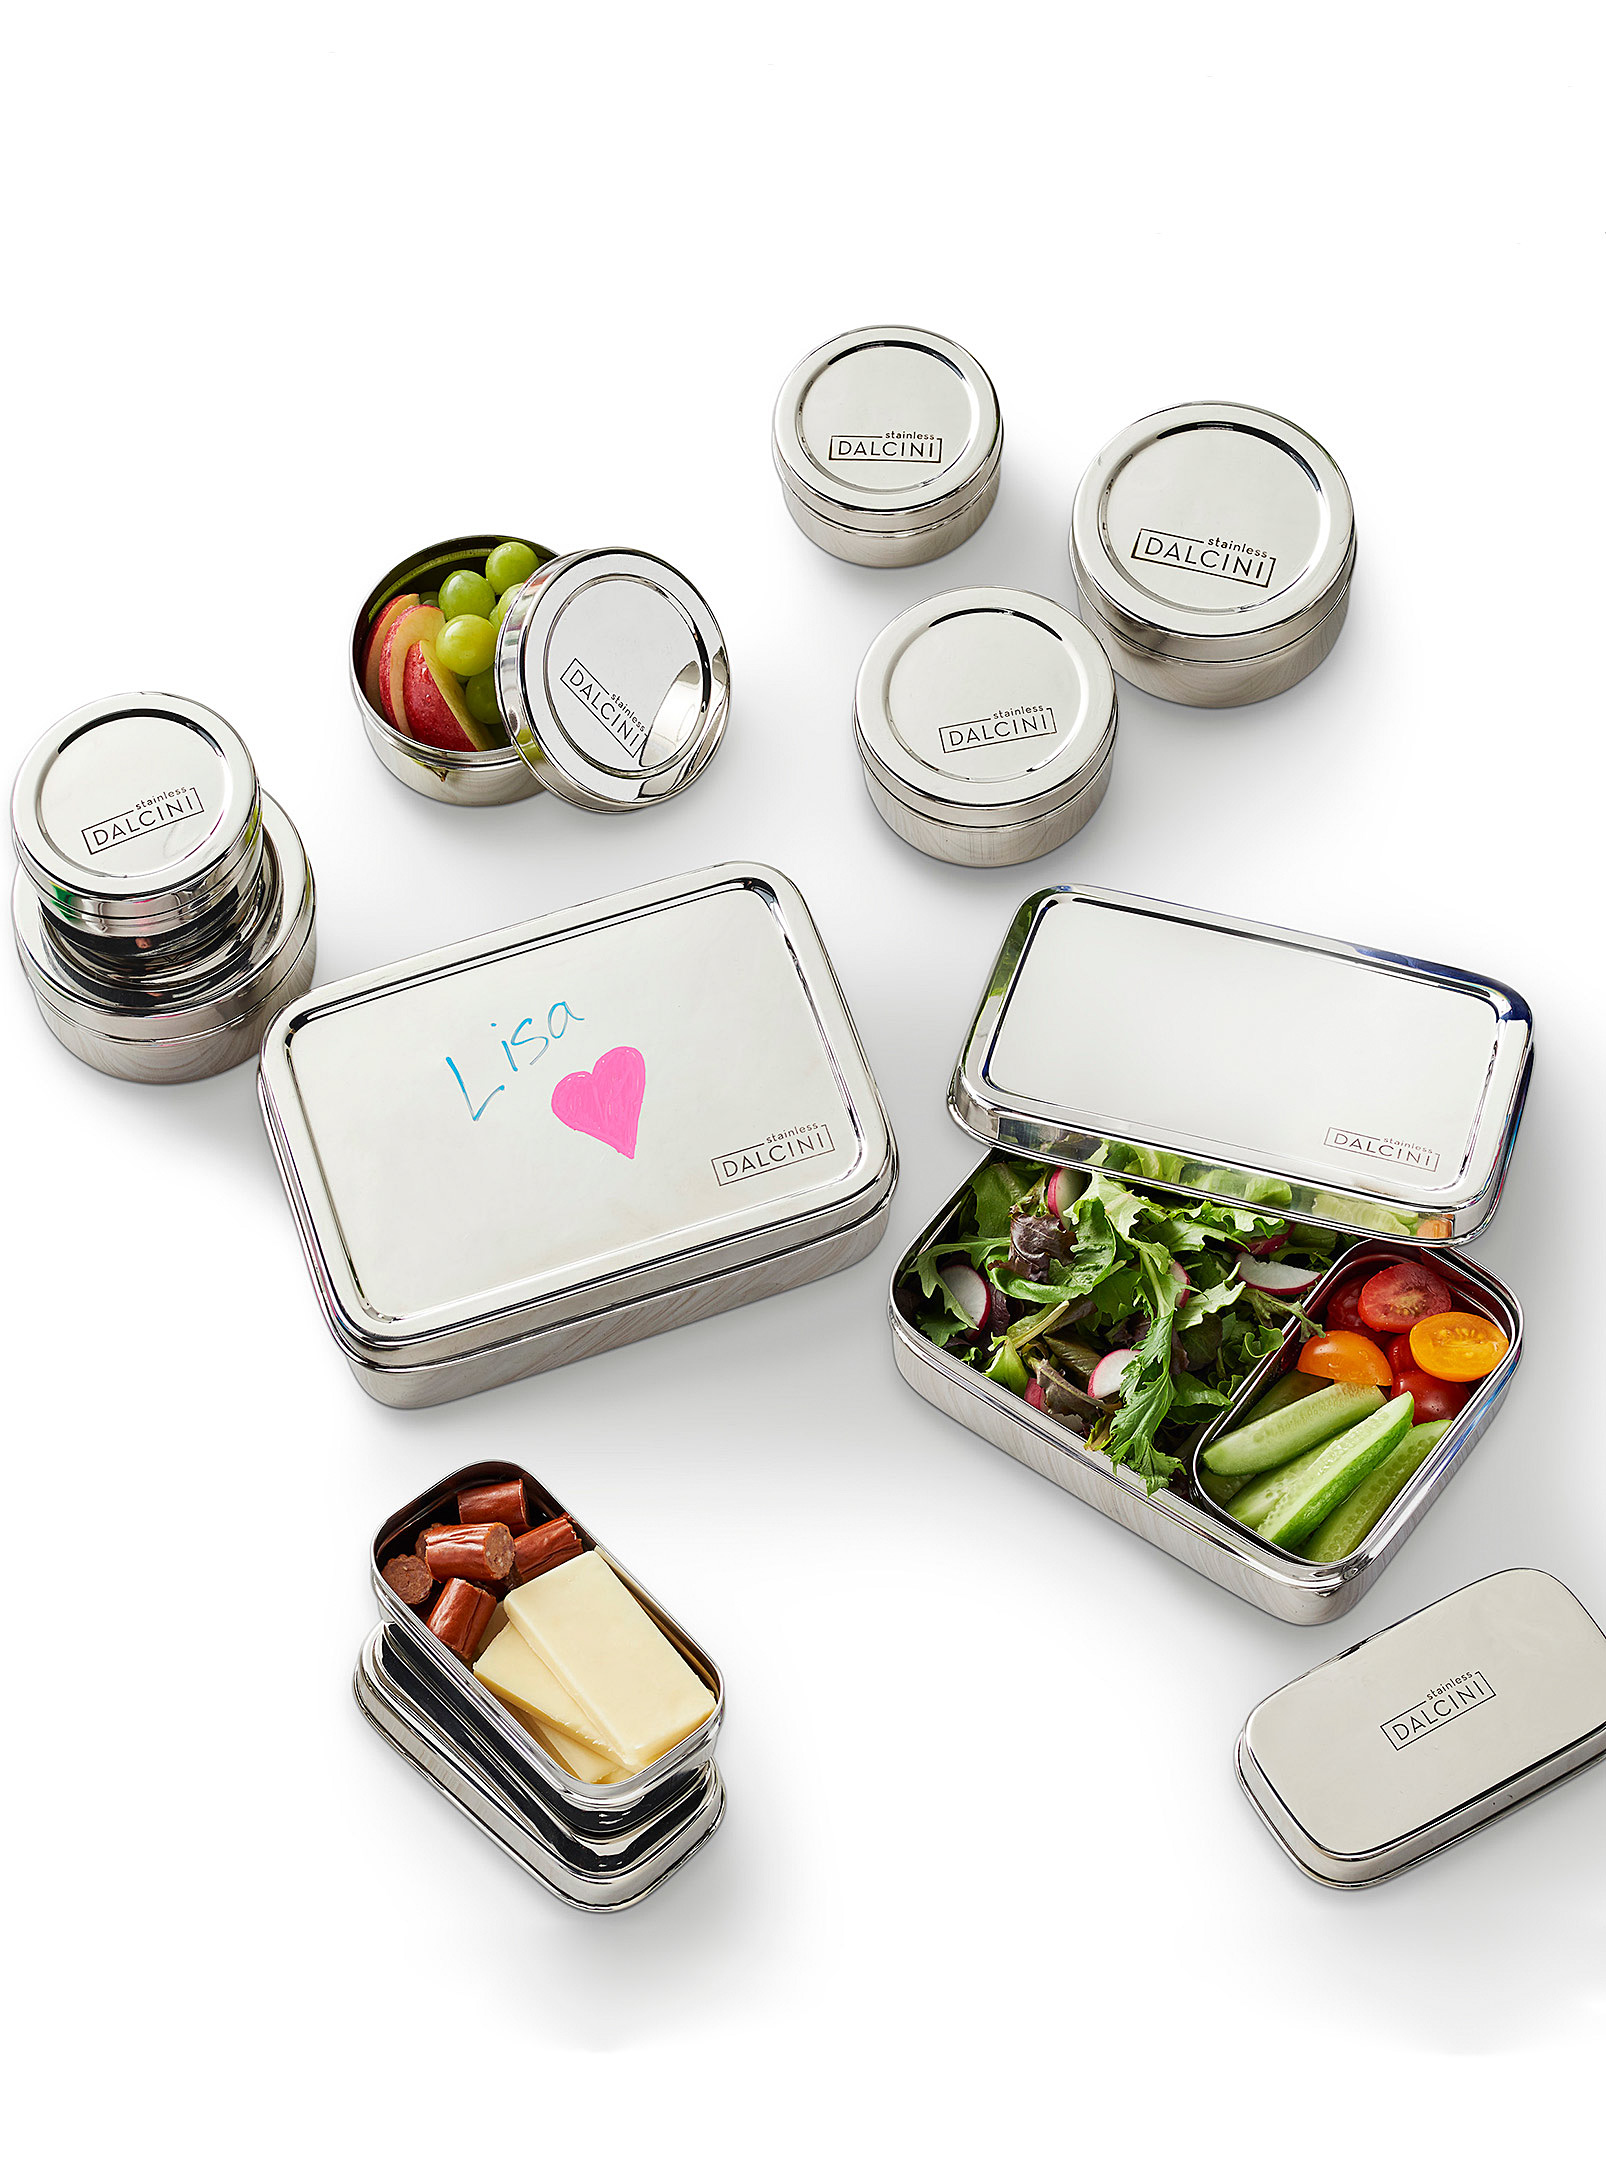 Dalcini Stainless - Various stainless sT-Shirtl containers 10-piece set